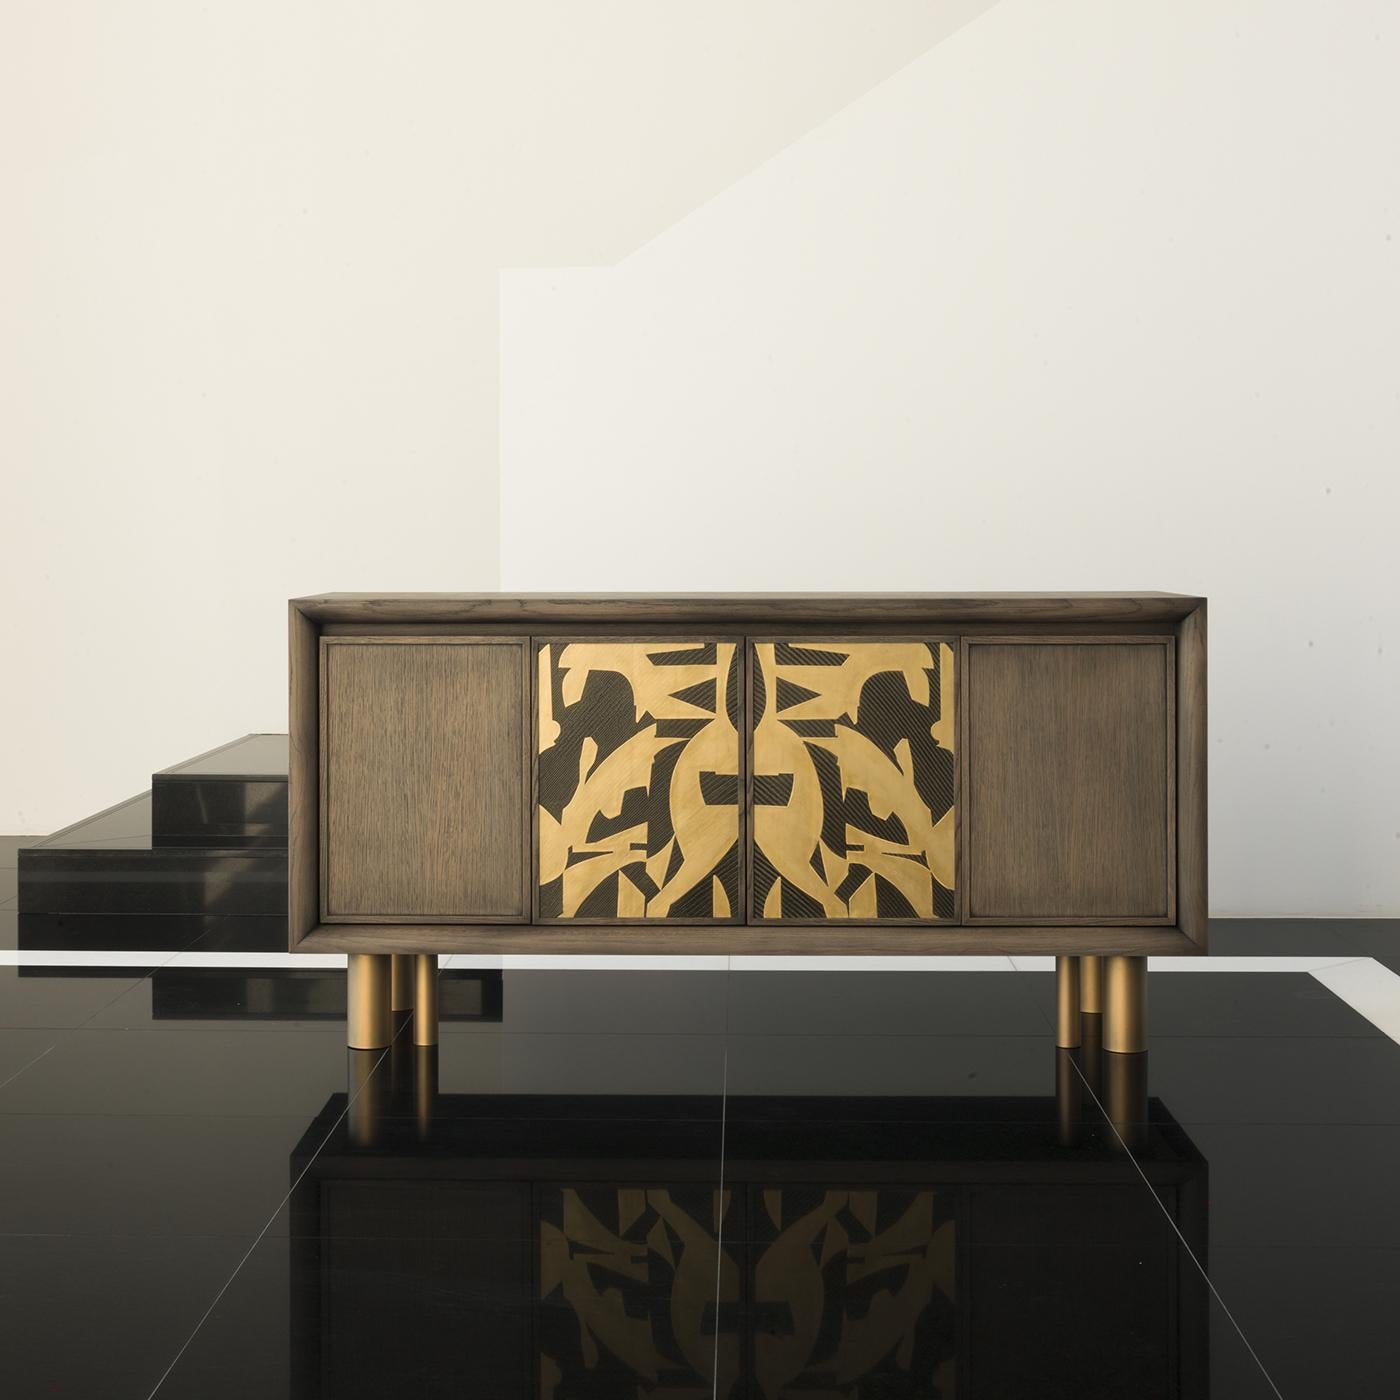 A stunning piece from Chiara Provasi's Couture Collection, the Mila Abstract Painting Sideboard is the fruit of research into the intersection of fashion, art and furniture. Handcrafted in oak with a gray finish, the sideboard features two cabinet